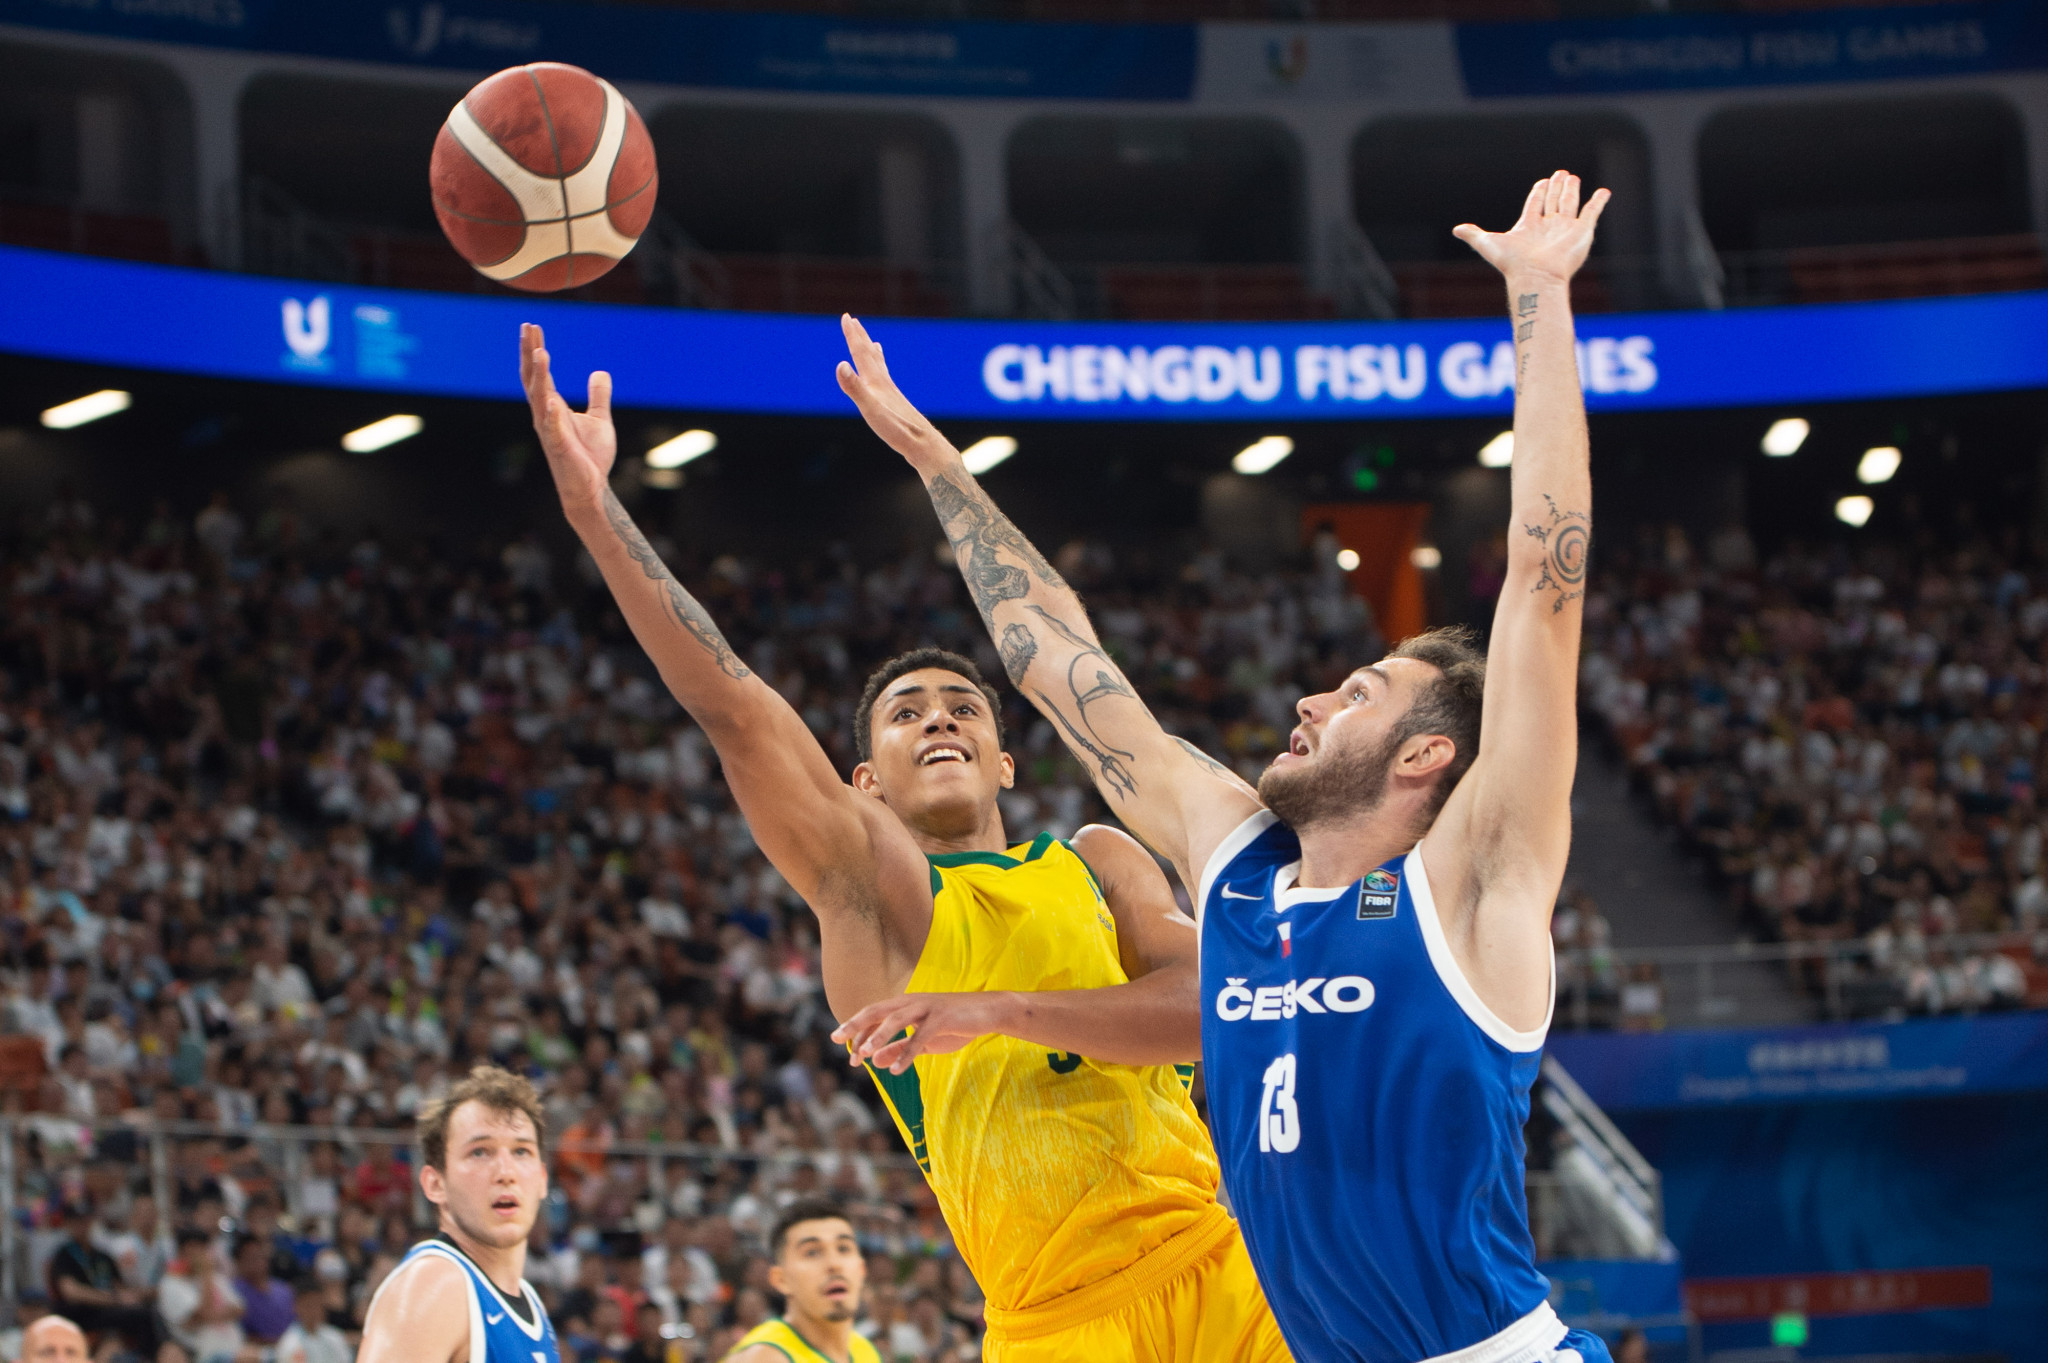 Action from the men’s basketball gold-medal match between Brazil and the Czech Republic ©FISU